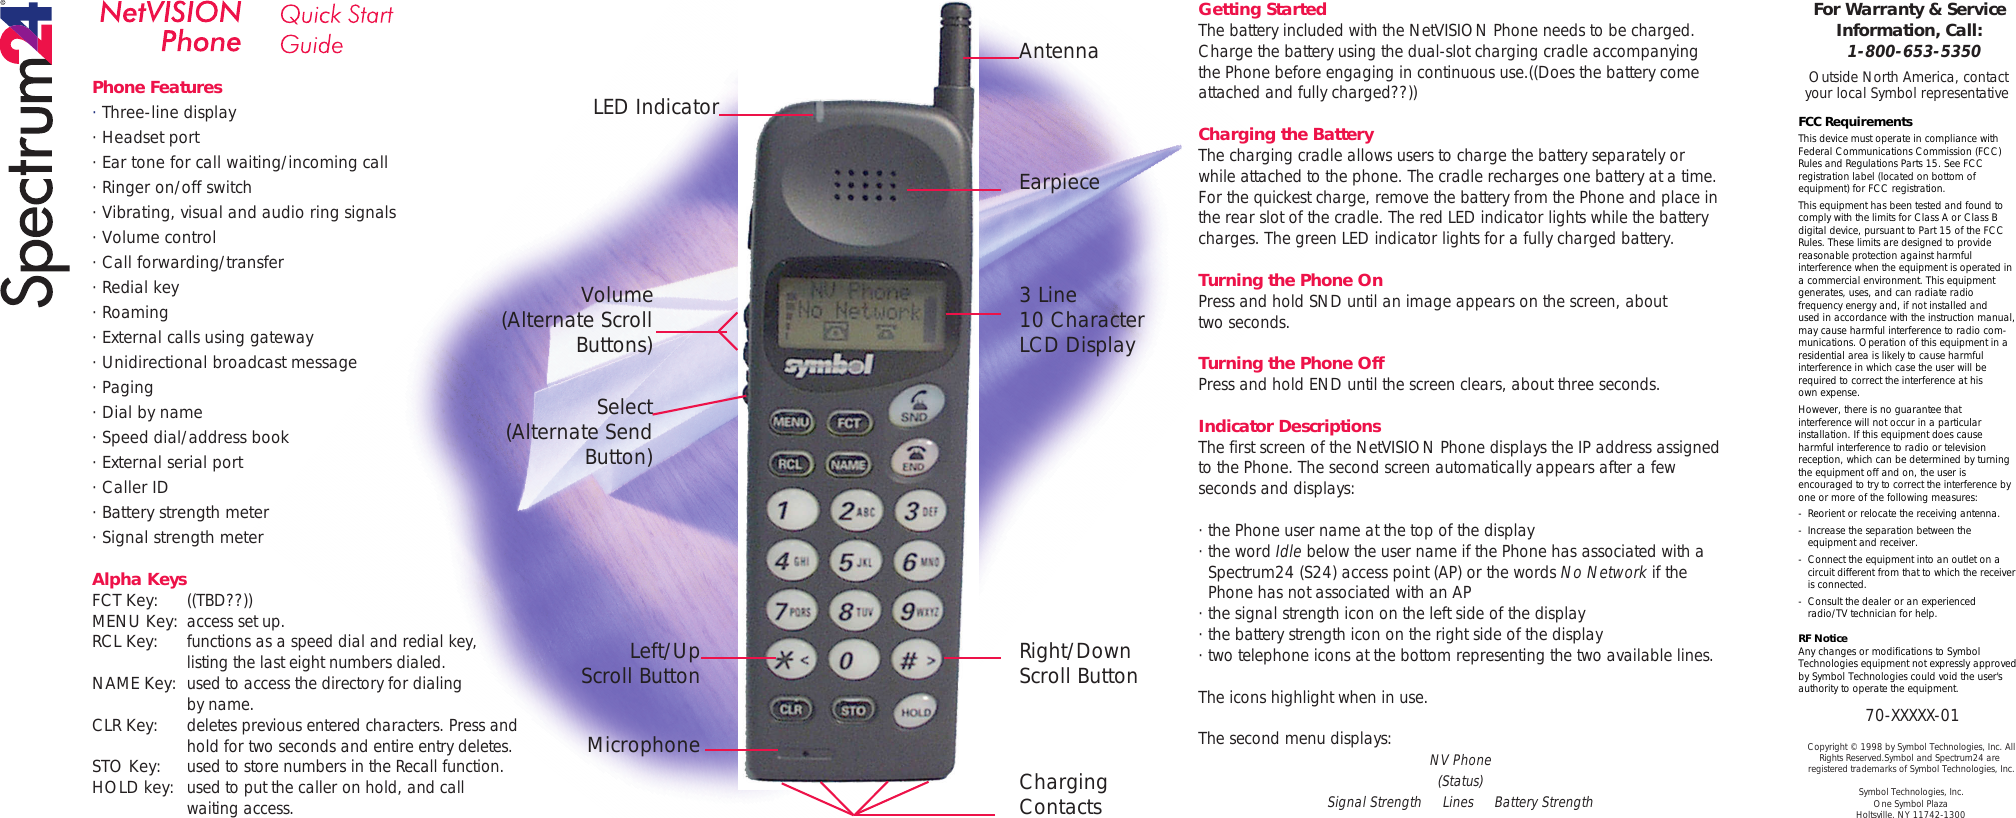 Phone Features· Three-line display· Headset port· Ear tone for call waiting/incoming call· Ringer on/off switch· Vibrating, visual and audio ring signals· Volume control· Call forwarding/transfer· Redial key· Roaming· External calls using gateway· Unidirectional broadcast message· Paging· Dial by name· Speed dial/address book· External serial port· Caller ID· Battery strength meter· Signal strength meterAlpha KeysFCT Key: ((TBD??))MENU Key: access set up.RCL Key: functions as a speed dial and redial key, listing the last eight numbers dialed.NAME Key: used to access the directory for dialing by name.CLR Key: deletes previous entered characters. Press and  hold for two seconds and entire entry deletes.STO Key: used to store numbers in the Recall function.HOLD key: used to put the caller on hold, and call waiting access.Getting StartedThe battery included with the NetVISION Phone needs to be charged. Charge the battery using the dual-slot charging cradle accompanying the Phone before engaging in continuous use.((Does the battery come attached and fully charged??))Charging the BatteryThe charging cradle allows users to charge the battery separately or while attached to the phone. The cradle recharges one battery at a time. For the quickest charge, remove the battery from the Phone and place in the rear slot of the cradle. The red LED indicator lights while the battery charges. The green LED indicator lights for a fully charged battery. Turning the Phone OnPress and hold SND until an image appears on the screen, abouttwo seconds.Turning the Phone OffPress and hold END until the screen clears, about three seconds.Indicator DescriptionsThe first screen of the NetVISION Phone displays the IP address assigned to the Phone. The second screen automatically appears after a few seconds and displays:·the Phone user name at the top of the display·the word Idle below the user name if the Phone has associated with a   Spectrum24 (S24) access point (AP) or the words No Network if the   Phone has not associated with an AP·the signal strength icon on the left side of the display·the battery strength icon on the right side of the display·two telephone icons at the bottom representing the two available lines. The icons highlight when in use.The second menu displays: NV Phone(Status)Signal StrengthLinesBattery StrengthFor Warranty &amp; Service Information, Call:1-800-653-5350Outside North America, contact your local Symbol representativeFCC RequirementsThis device must operate in compliance with Federal Communications Commission (FCC) Rules and Regulations Parts 15. See FCC registration label (located on bottom of equipment) for FCC registration.This equipment has been tested and found to comply with the limits for Class A or Class B digital device, pursuant to Part 15 of the FCC Rules. These limits are designed to provide reasonable protection against harmful interference when the equipment is operated in a commercial environment. This equipment generates, uses, and can radiate radio frequency energy and, if not installed andused in accordance with the instruction manual, may cause harmful interference to radio com-munications. Operation of this equipment in a residential area is likely to cause harmful interference in which case the user will be required to correct the interference at hisown expense.However, there is no guarantee that interference will not occur in a particular installation. If this equipment does cause harmful interference to radio or television reception, which can be determined by turning the equipment off and on, the user is encouraged to try to correct the interference by one or more of the following measures:- Reorient or relocate the receiving antenna.- Increase the separation between the  equipment and receiver.- Connect the equipment into an outlet on a  circuit different from that to which the receiver  is connected.- Consult the dealer or an experienced  radio/TV technician for help.RF NoticeAny changes or modifications to Symbol Technologies equipment not expressly approved by Symbol Technologies could void the user&apos;s authority to operate the equipment.70-XXXXX-01Copyright © 1998 by Symbol Technologies, Inc. All Rights Reserved.Symbol and Spectrum24 are registered trademarks of Symbol Technologies, Inc.Symbol Technologies, Inc.One Symbol PlazaHoltsville, NY 11742-1300AntennaEarpiece3 Line10 CharacterLCD DisplayRight/DownScroll ButtonCharging ContactsLED IndicatorVolume(Alternate Scroll Buttons)Select(Alternate Send Button)Left/UpScroll ButtonMicrophone